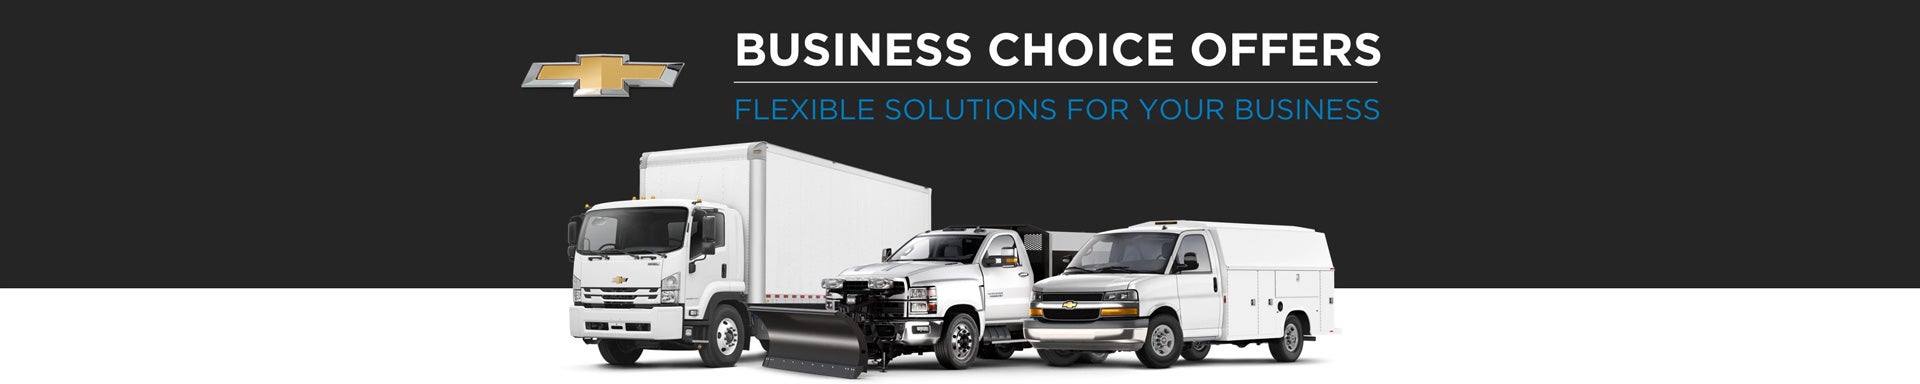 Chevrolet Business Choice Offers - Flexible Solutions for your Business - Karl Chevrolet in New Canaan CT